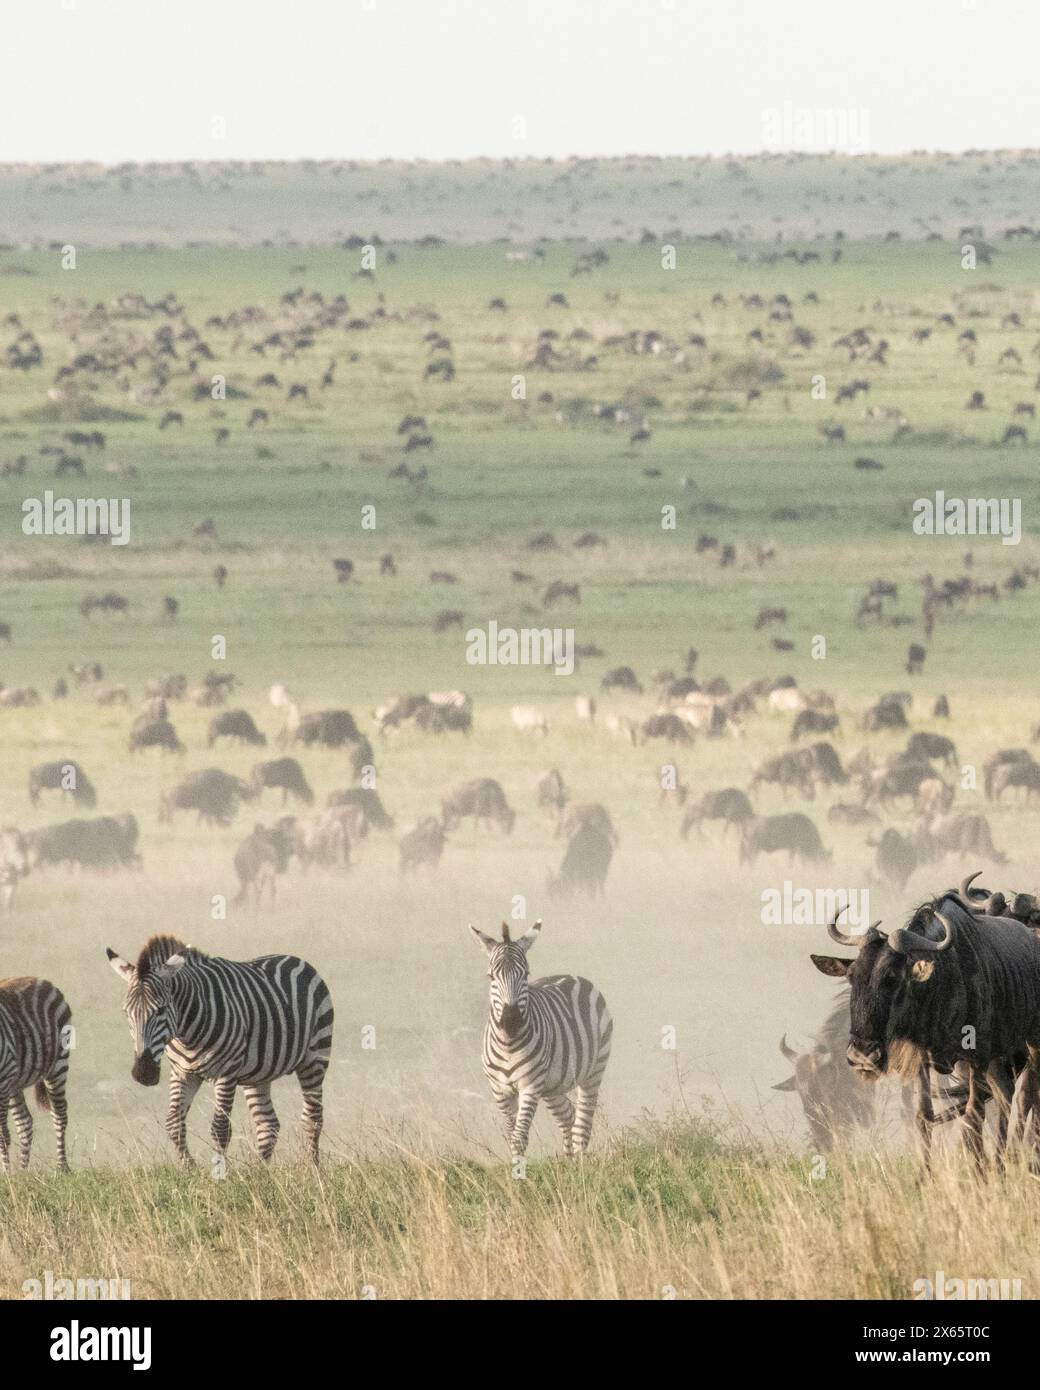 Thousands of zebra and wildebeest graze on the wide open plains Stock Photo